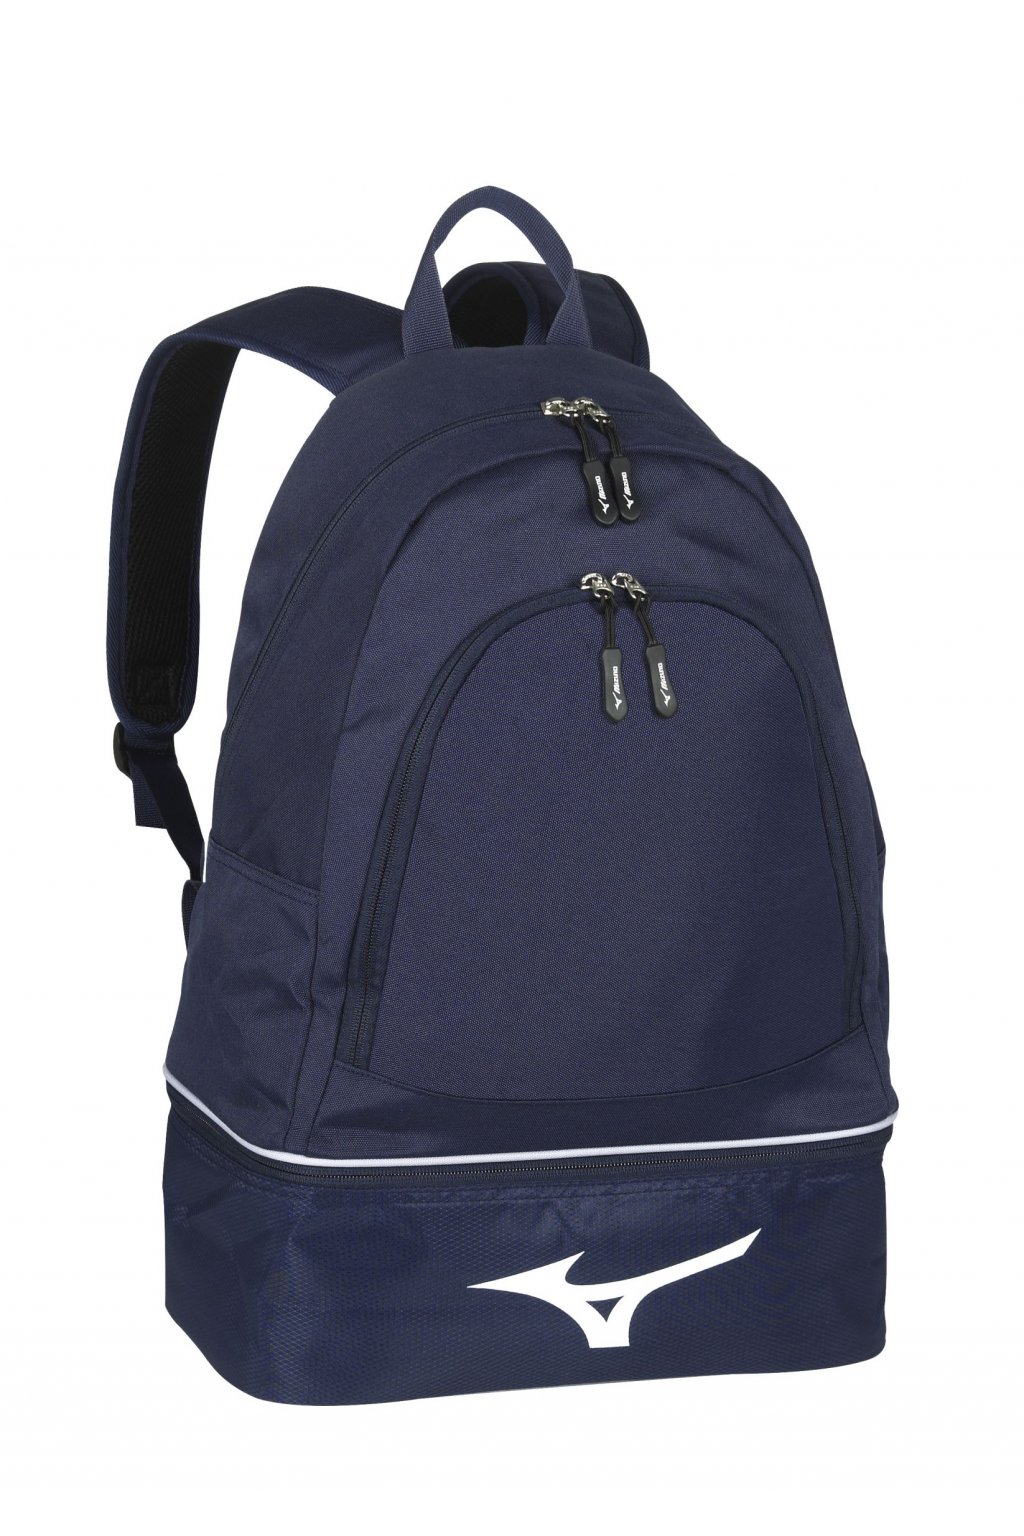 back pack navy white one size